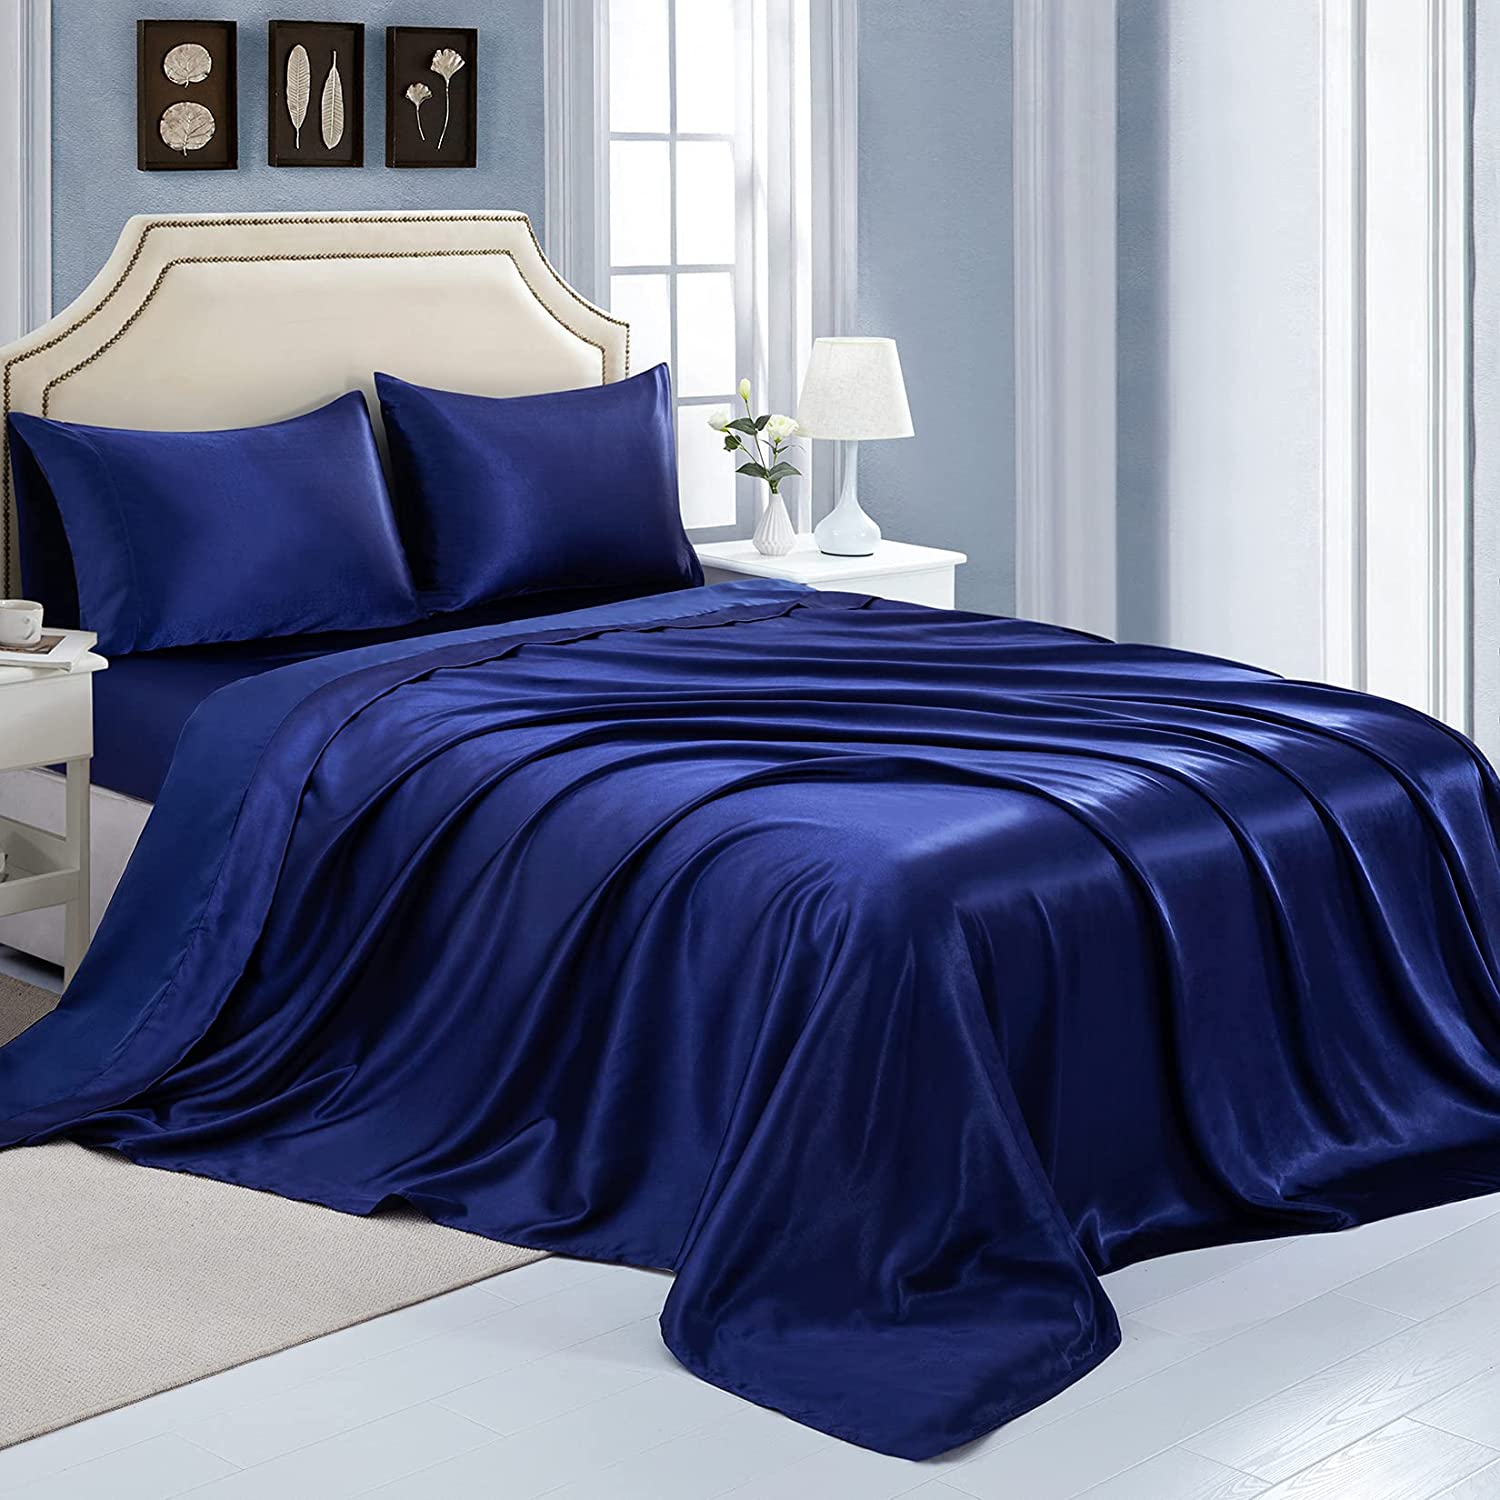 Silk Satin Bed Sheets, Full Size Sheets Set, Ultra Soft Silky Bedding Set  with 1 | eBay